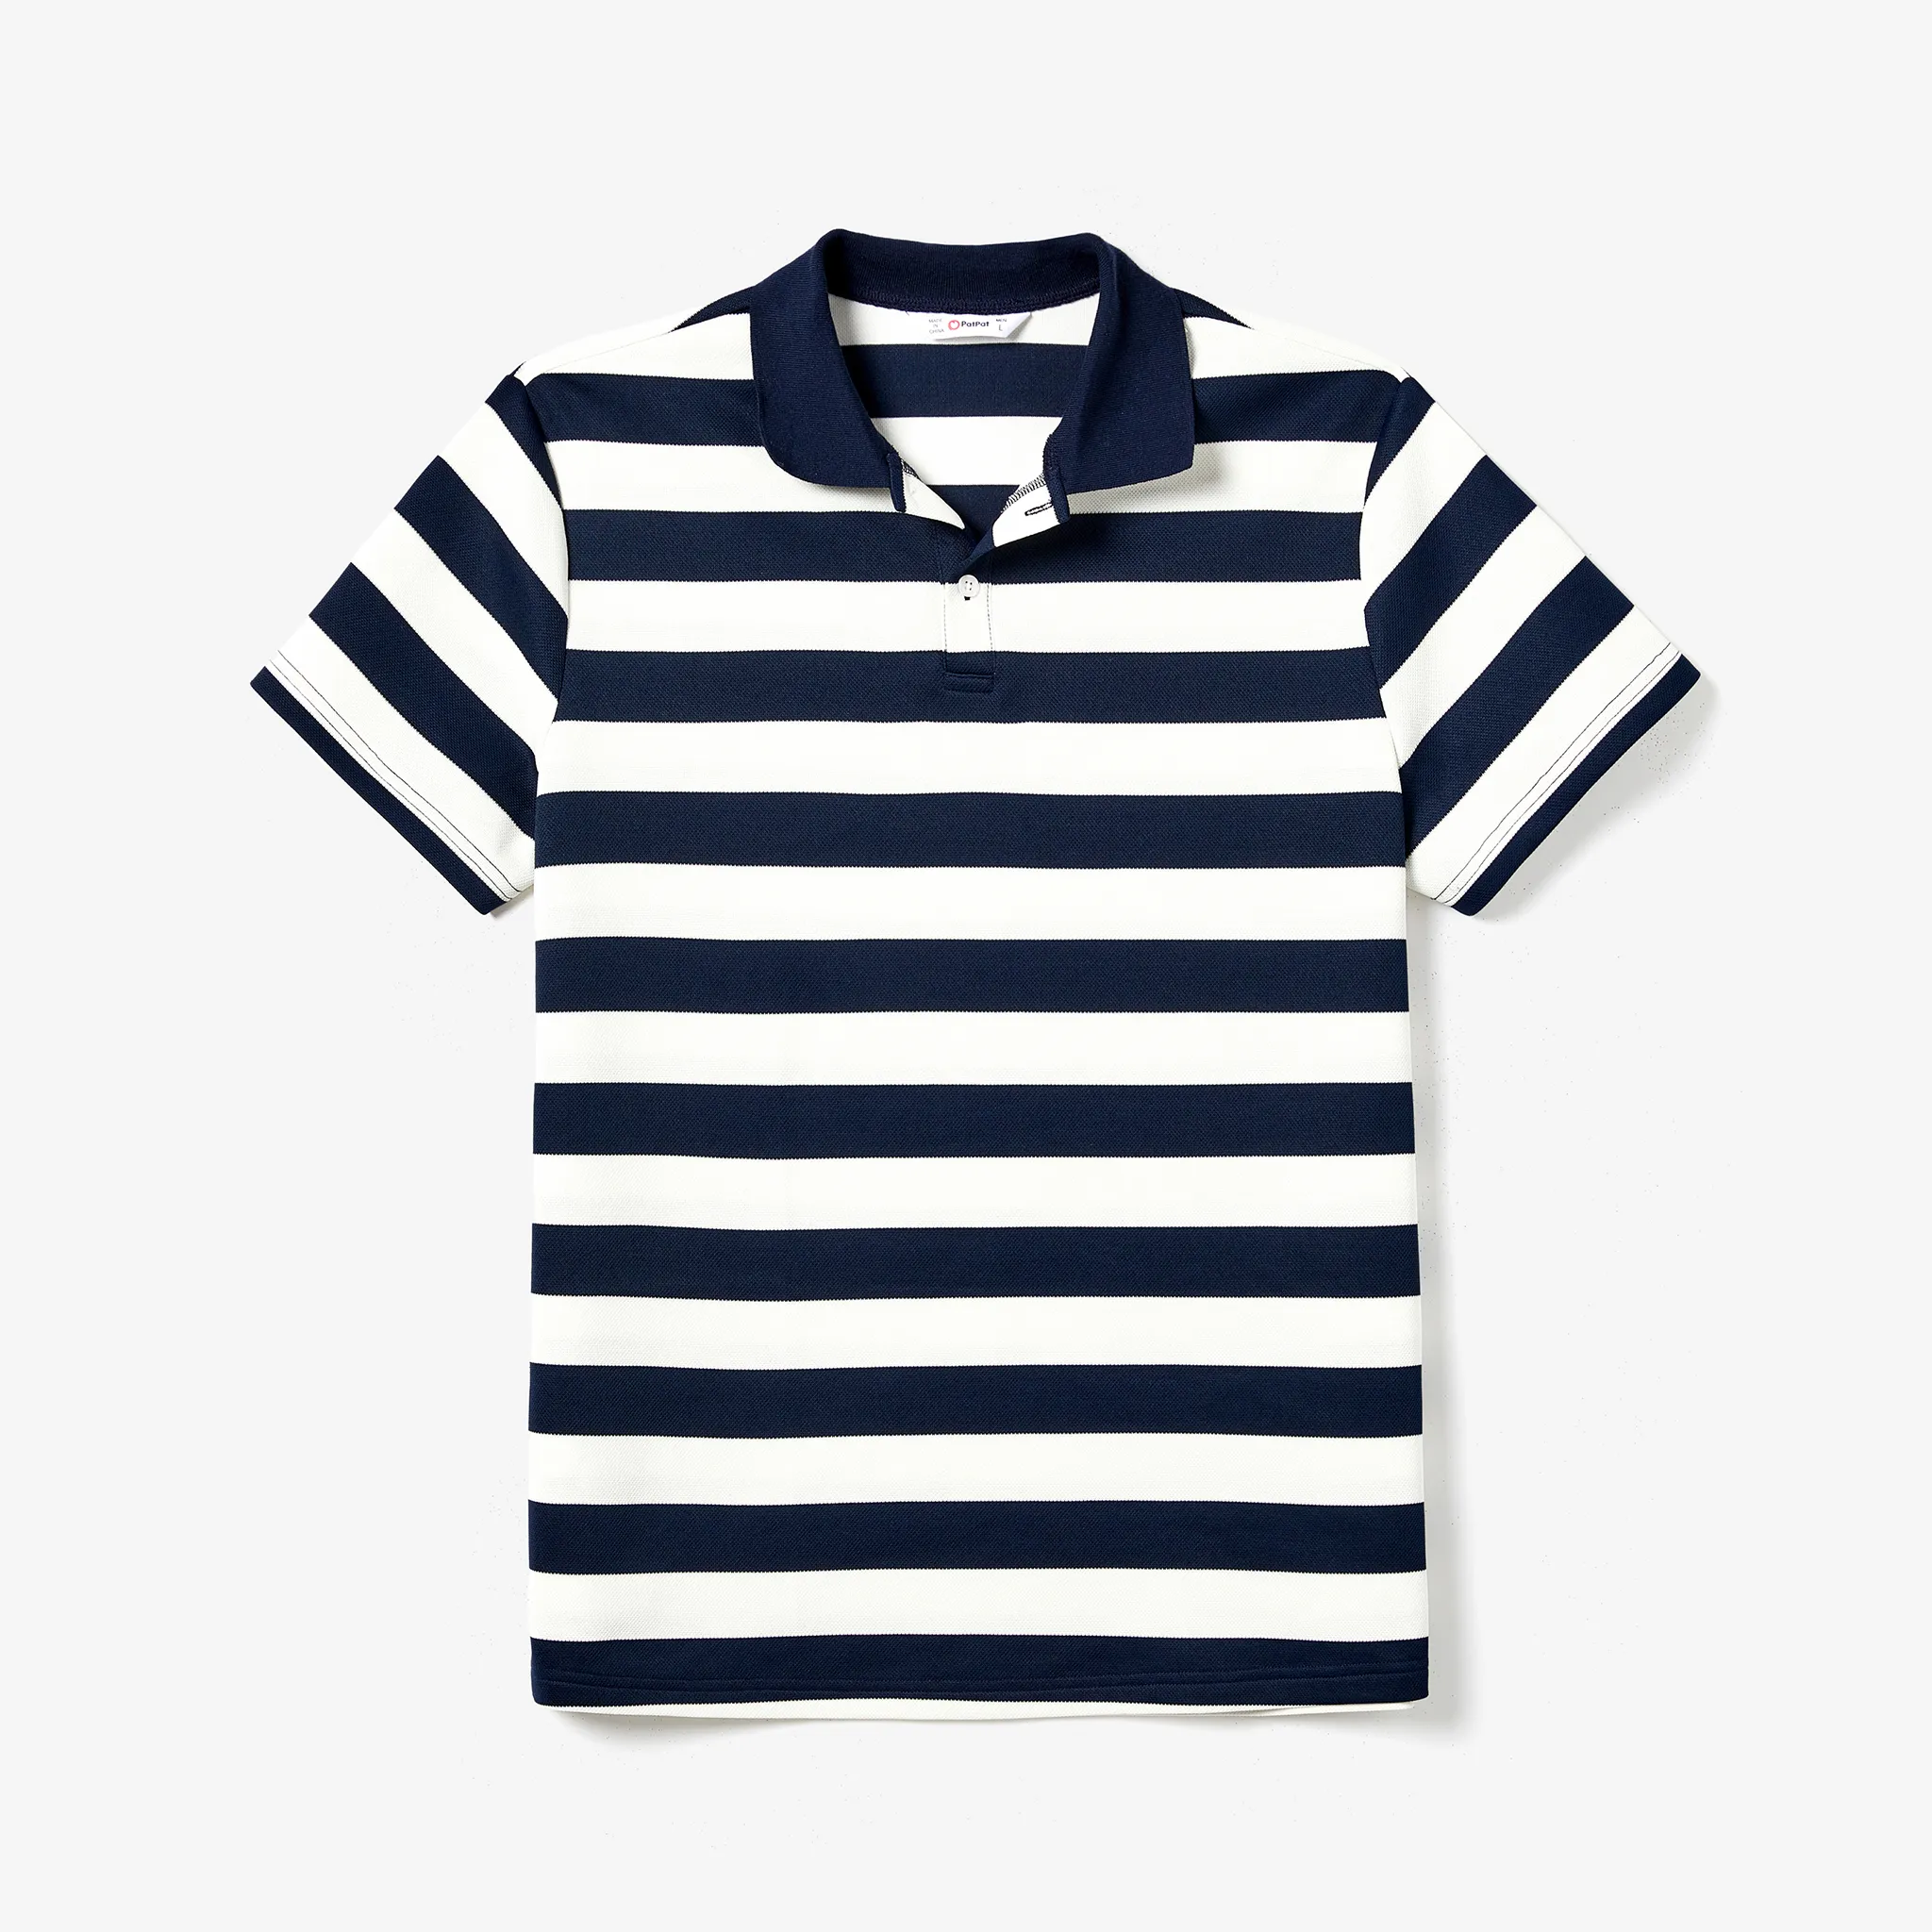 Family Matching Casual Navy Blue Short-sleeve Stripes Polo Shirts And Solid Sailor Collar Smocked Hem Dresses Sets